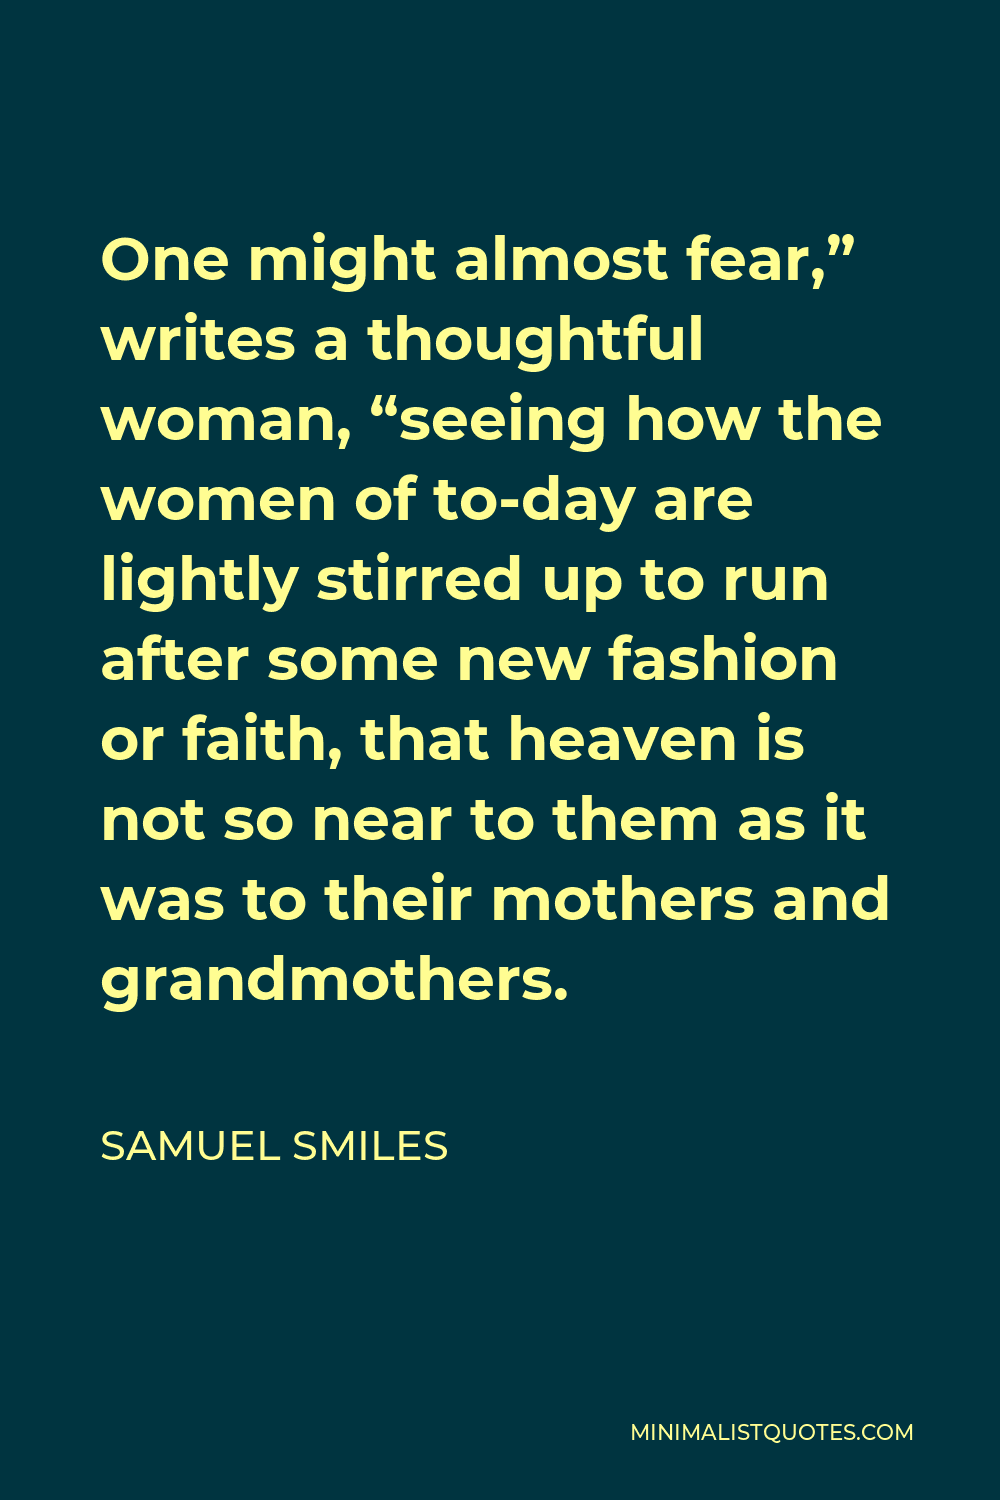 Samuel Smiles Quote - One might almost fear,” writes a thoughtful woman, “seeing how the women of to-day are lightly stirred up to run after some new fashion or faith, that heaven is not so near to them as it was to their mothers and grandmothers.